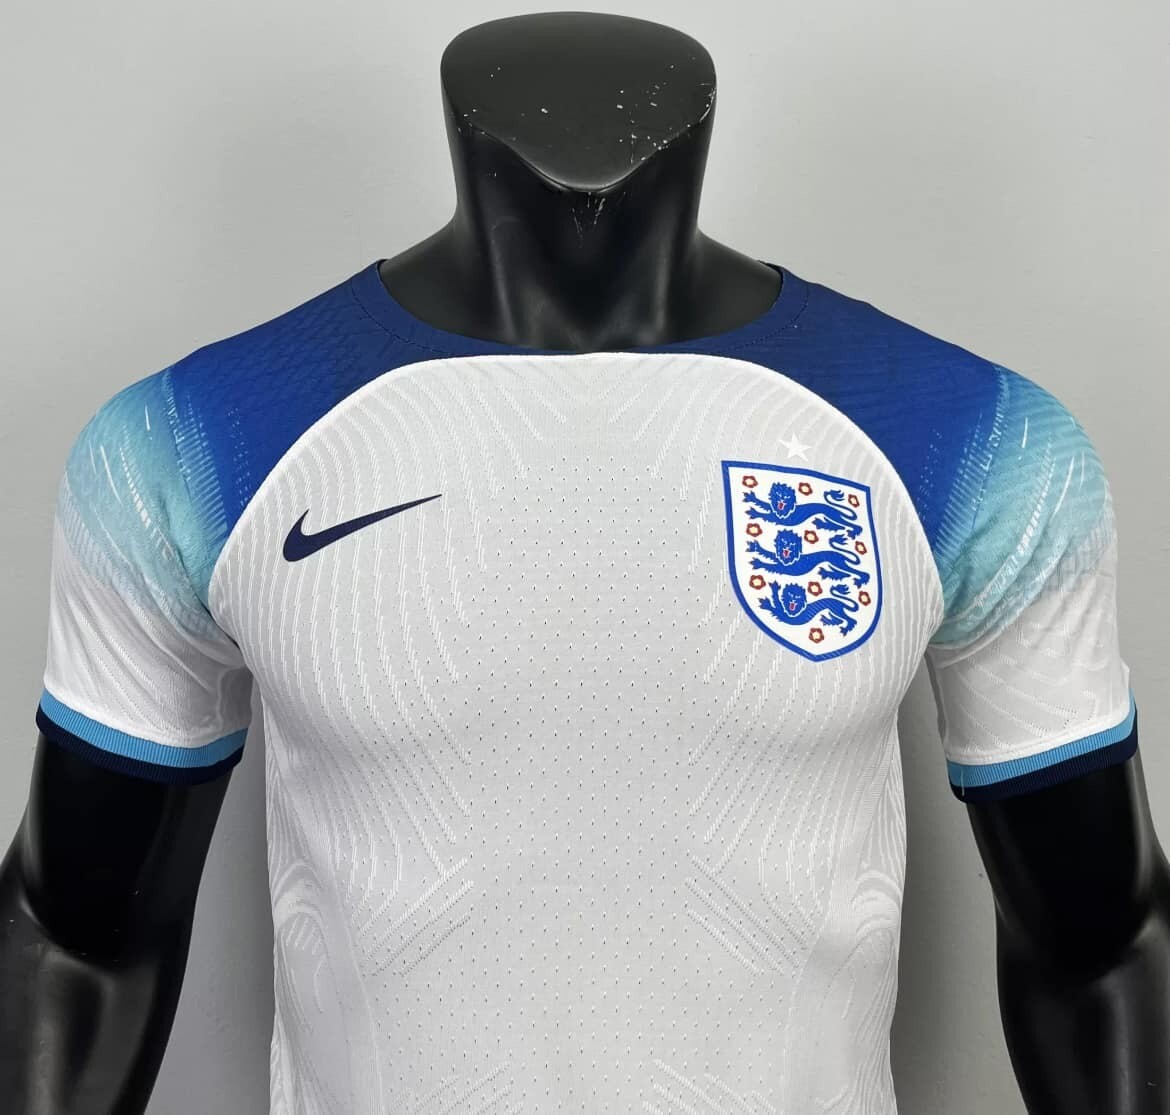 INGHILTERRA ENGLAND MAGLIA JERSEY CAMISETAS WORLD CUP 2022 PLAYER VERSION MATCH